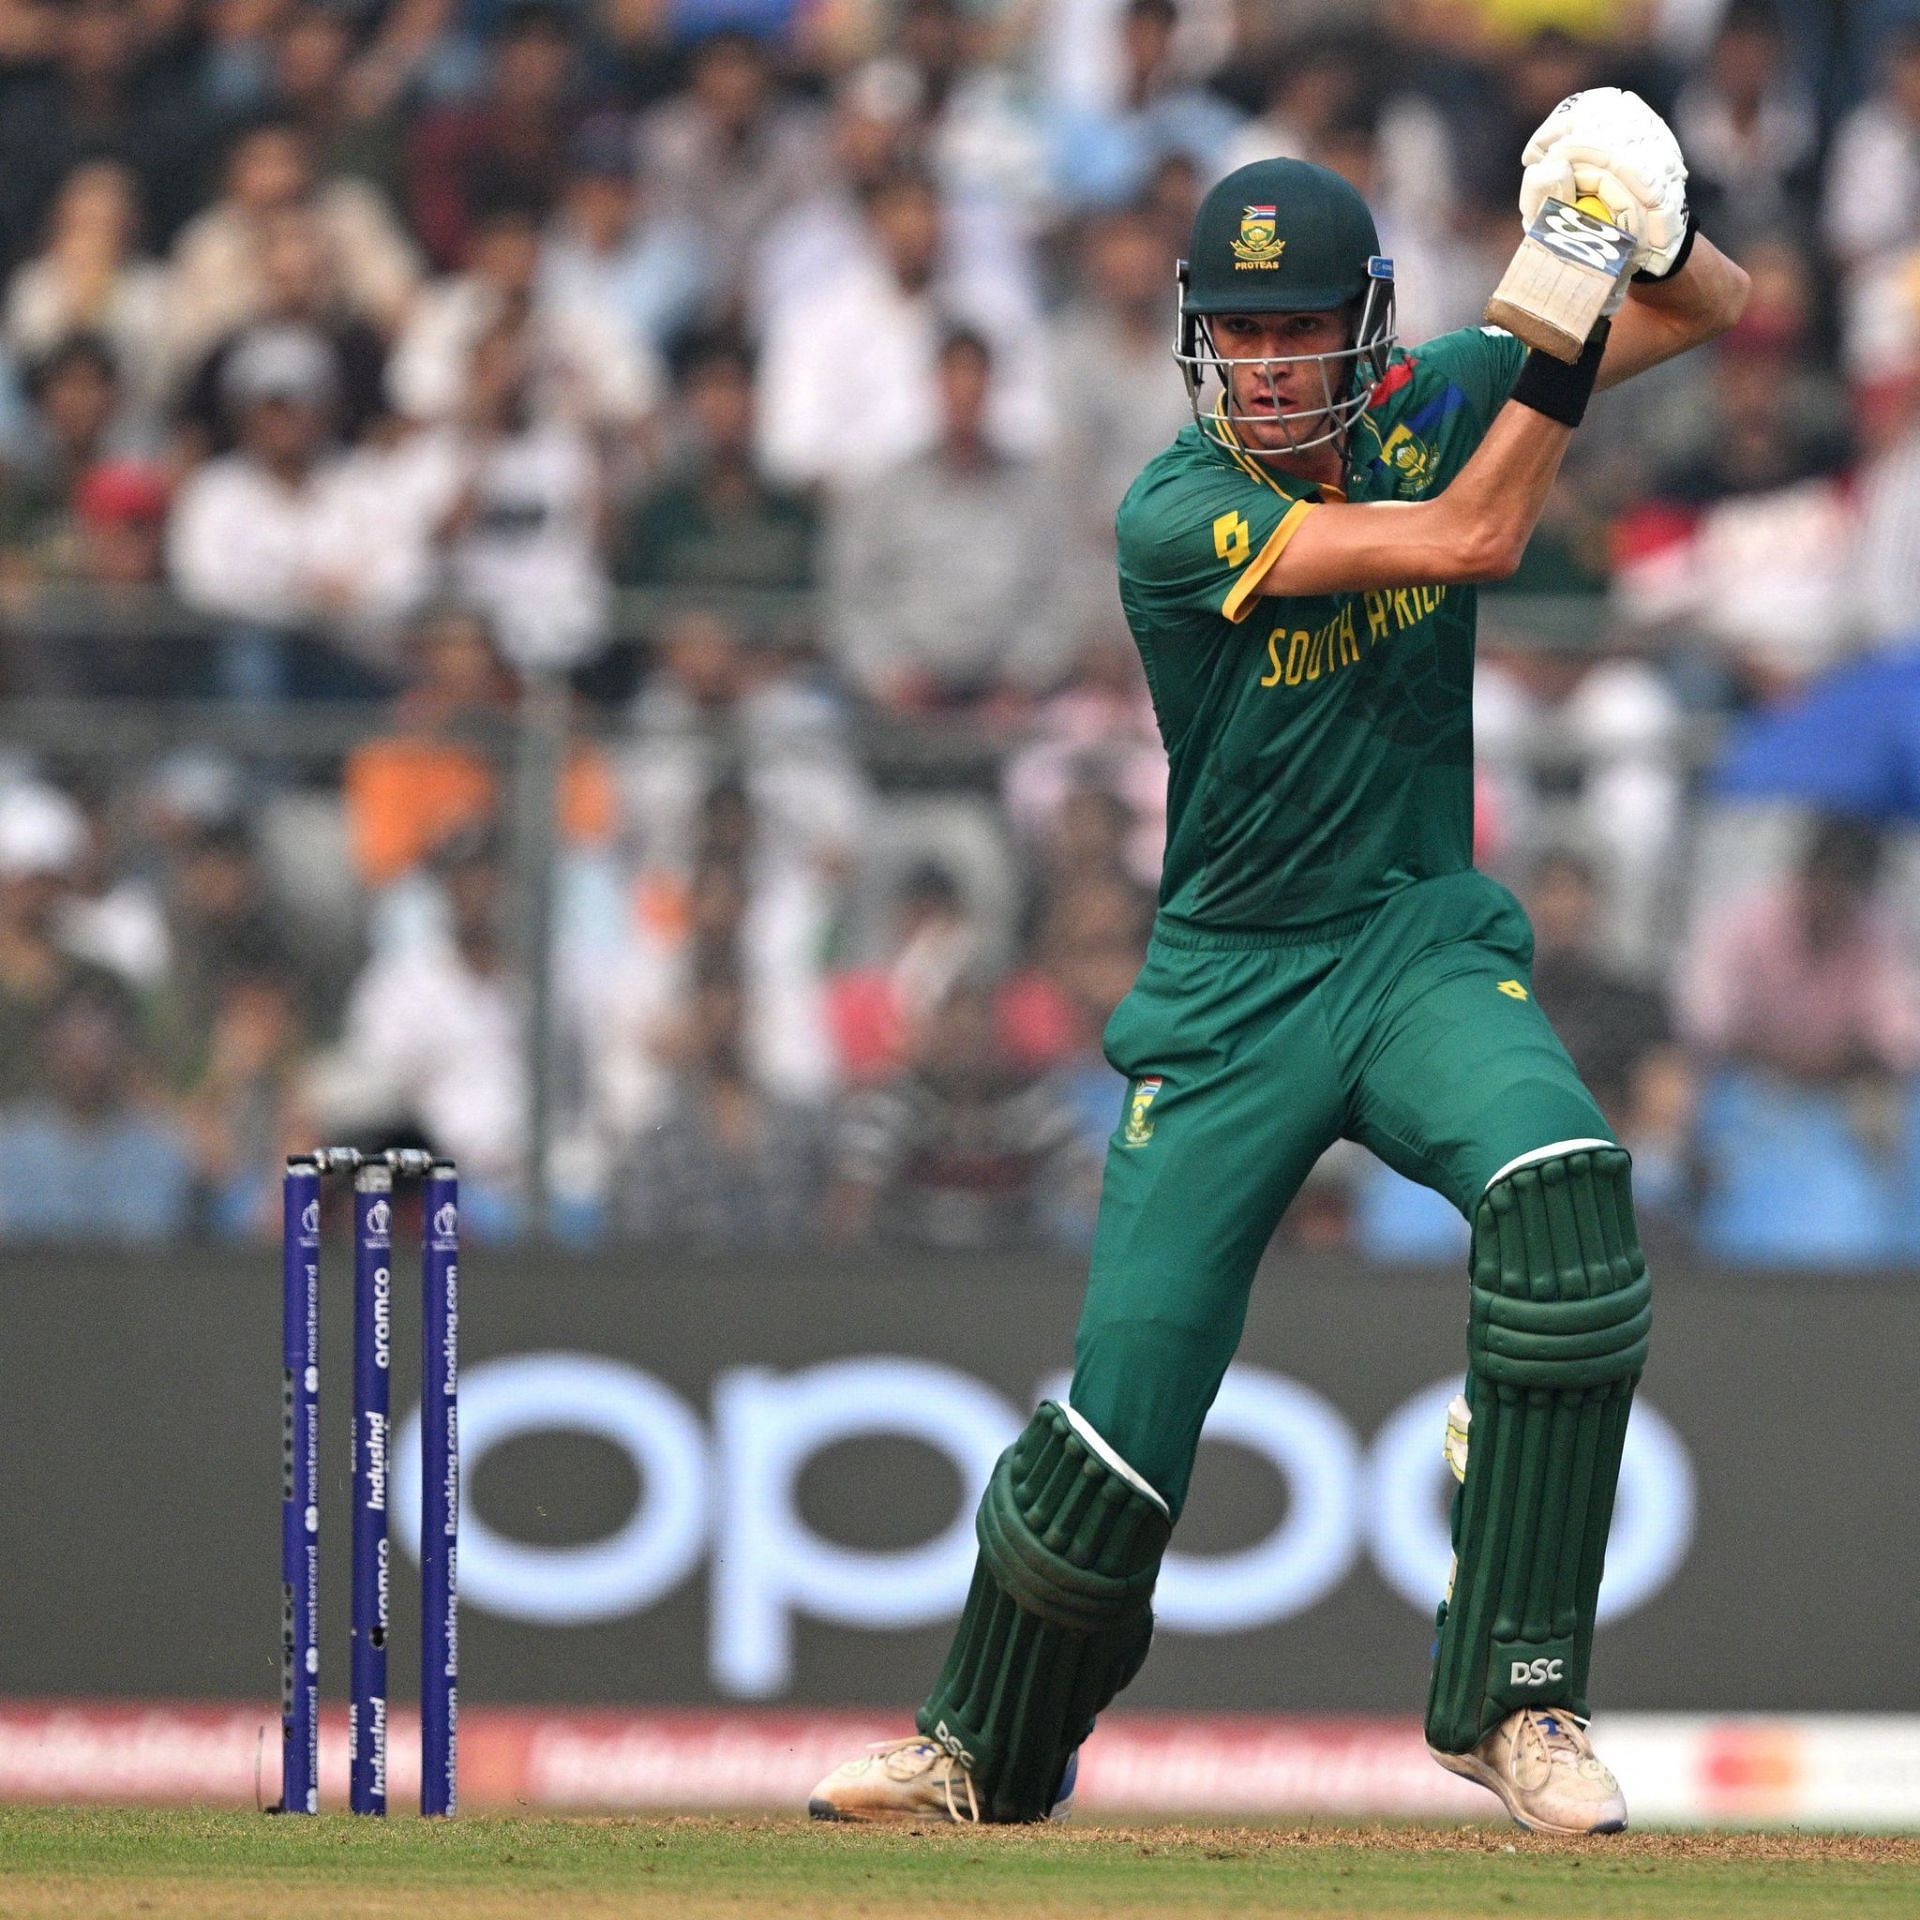 [Watch] Marco Jansen's colossal six caps Reece Topley's 26-run over in ENG vs SA 2023 World Cup clash